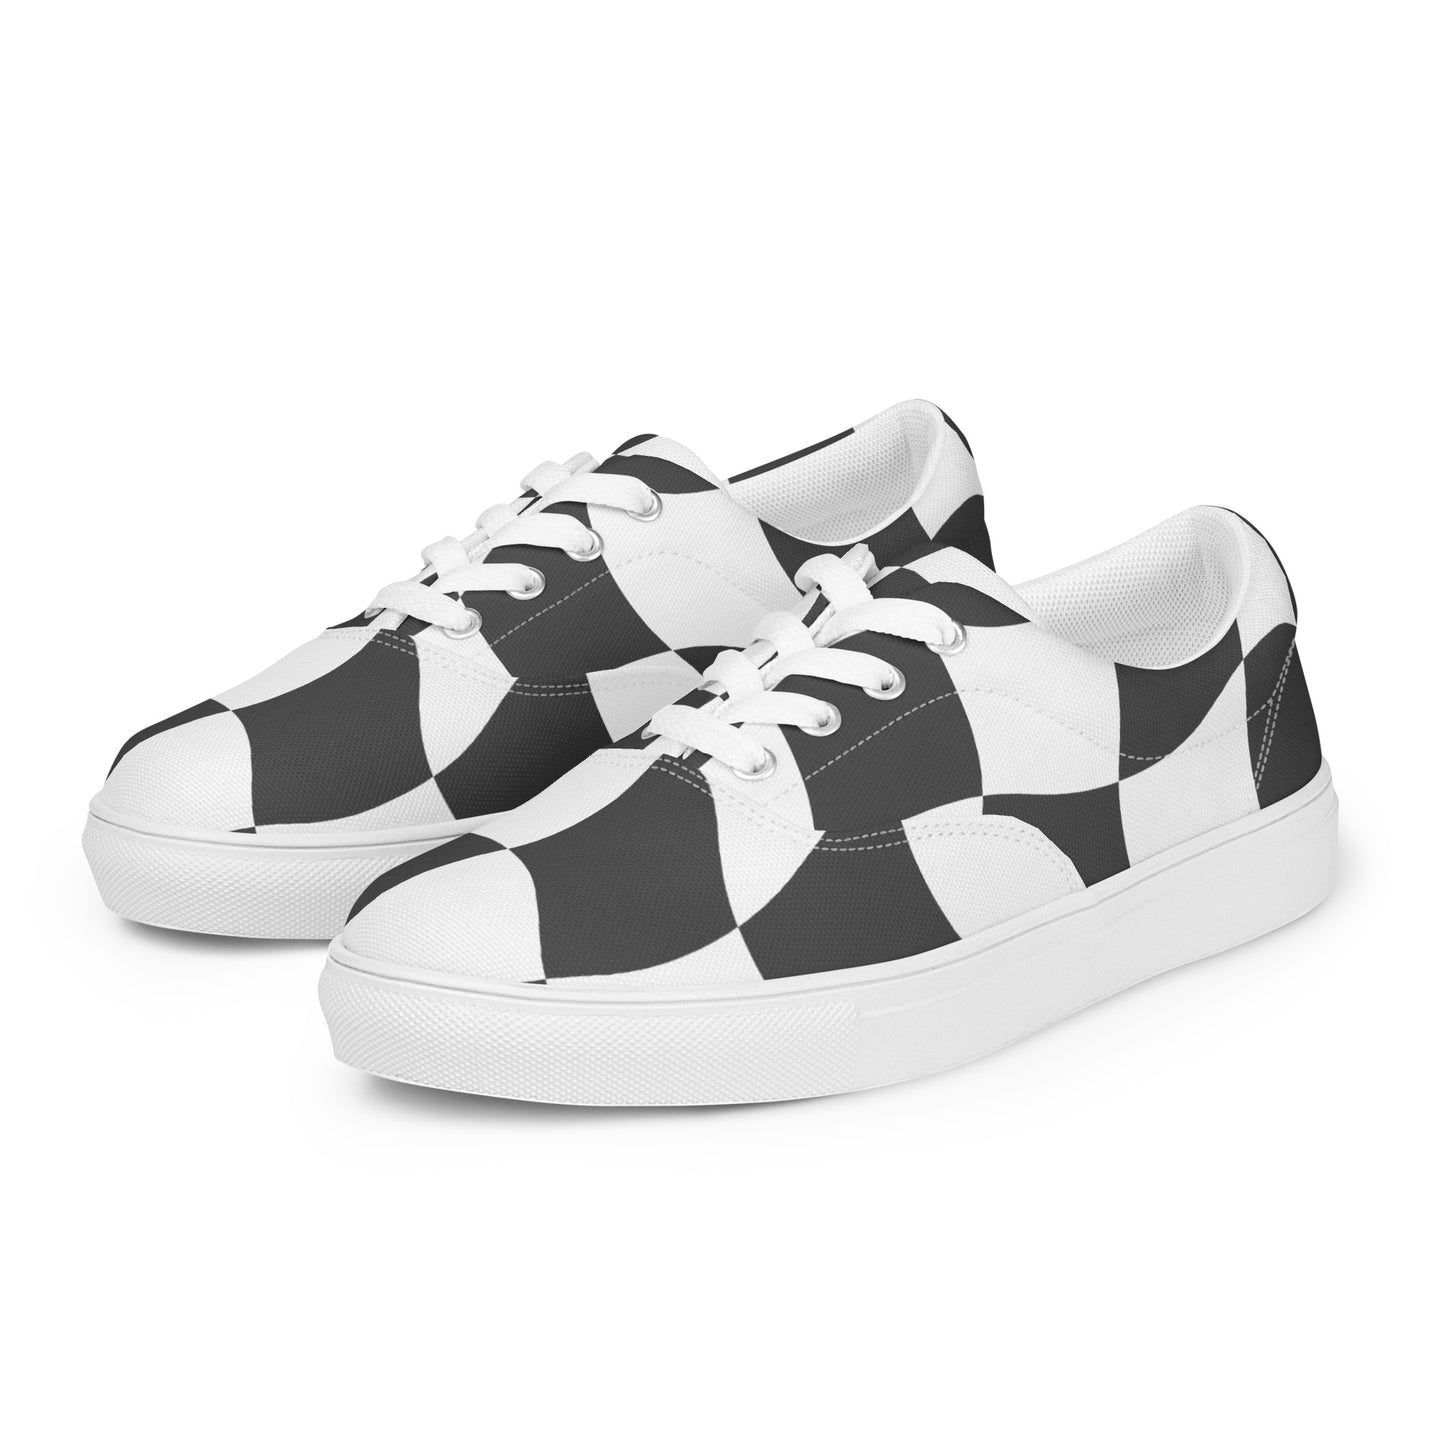 Women’s Lace-Up Canvas Wavy Checkerboard Shoes